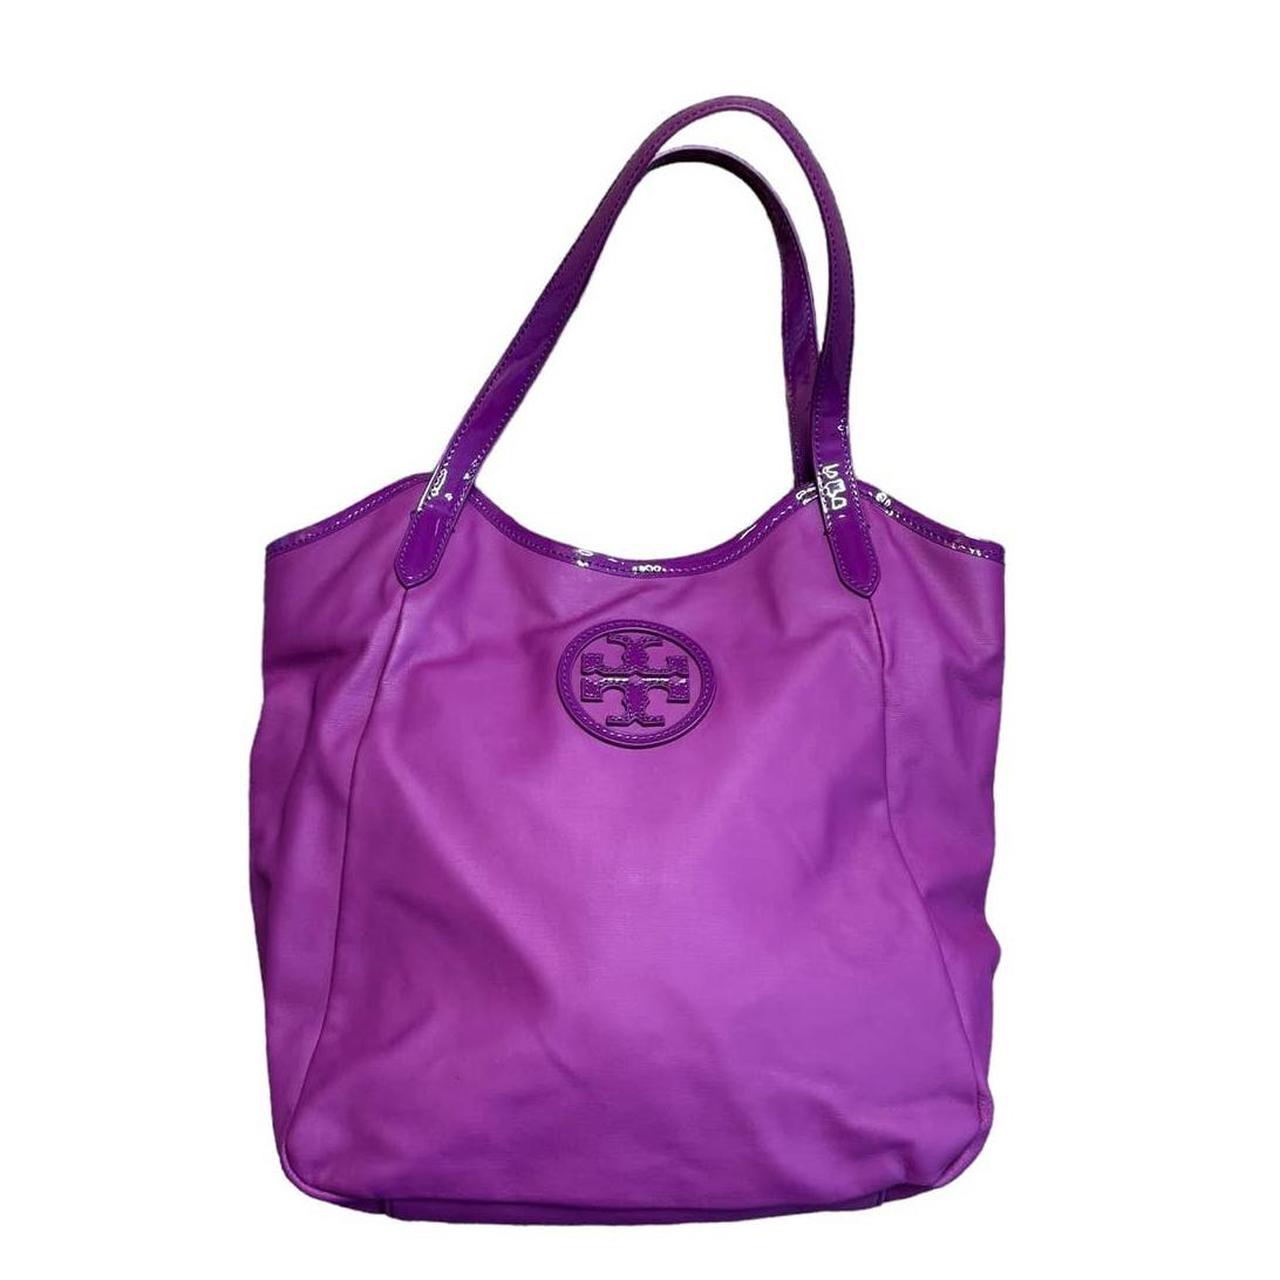 Shop Tory Burch T-Monogram Collection Online | Tory Burch